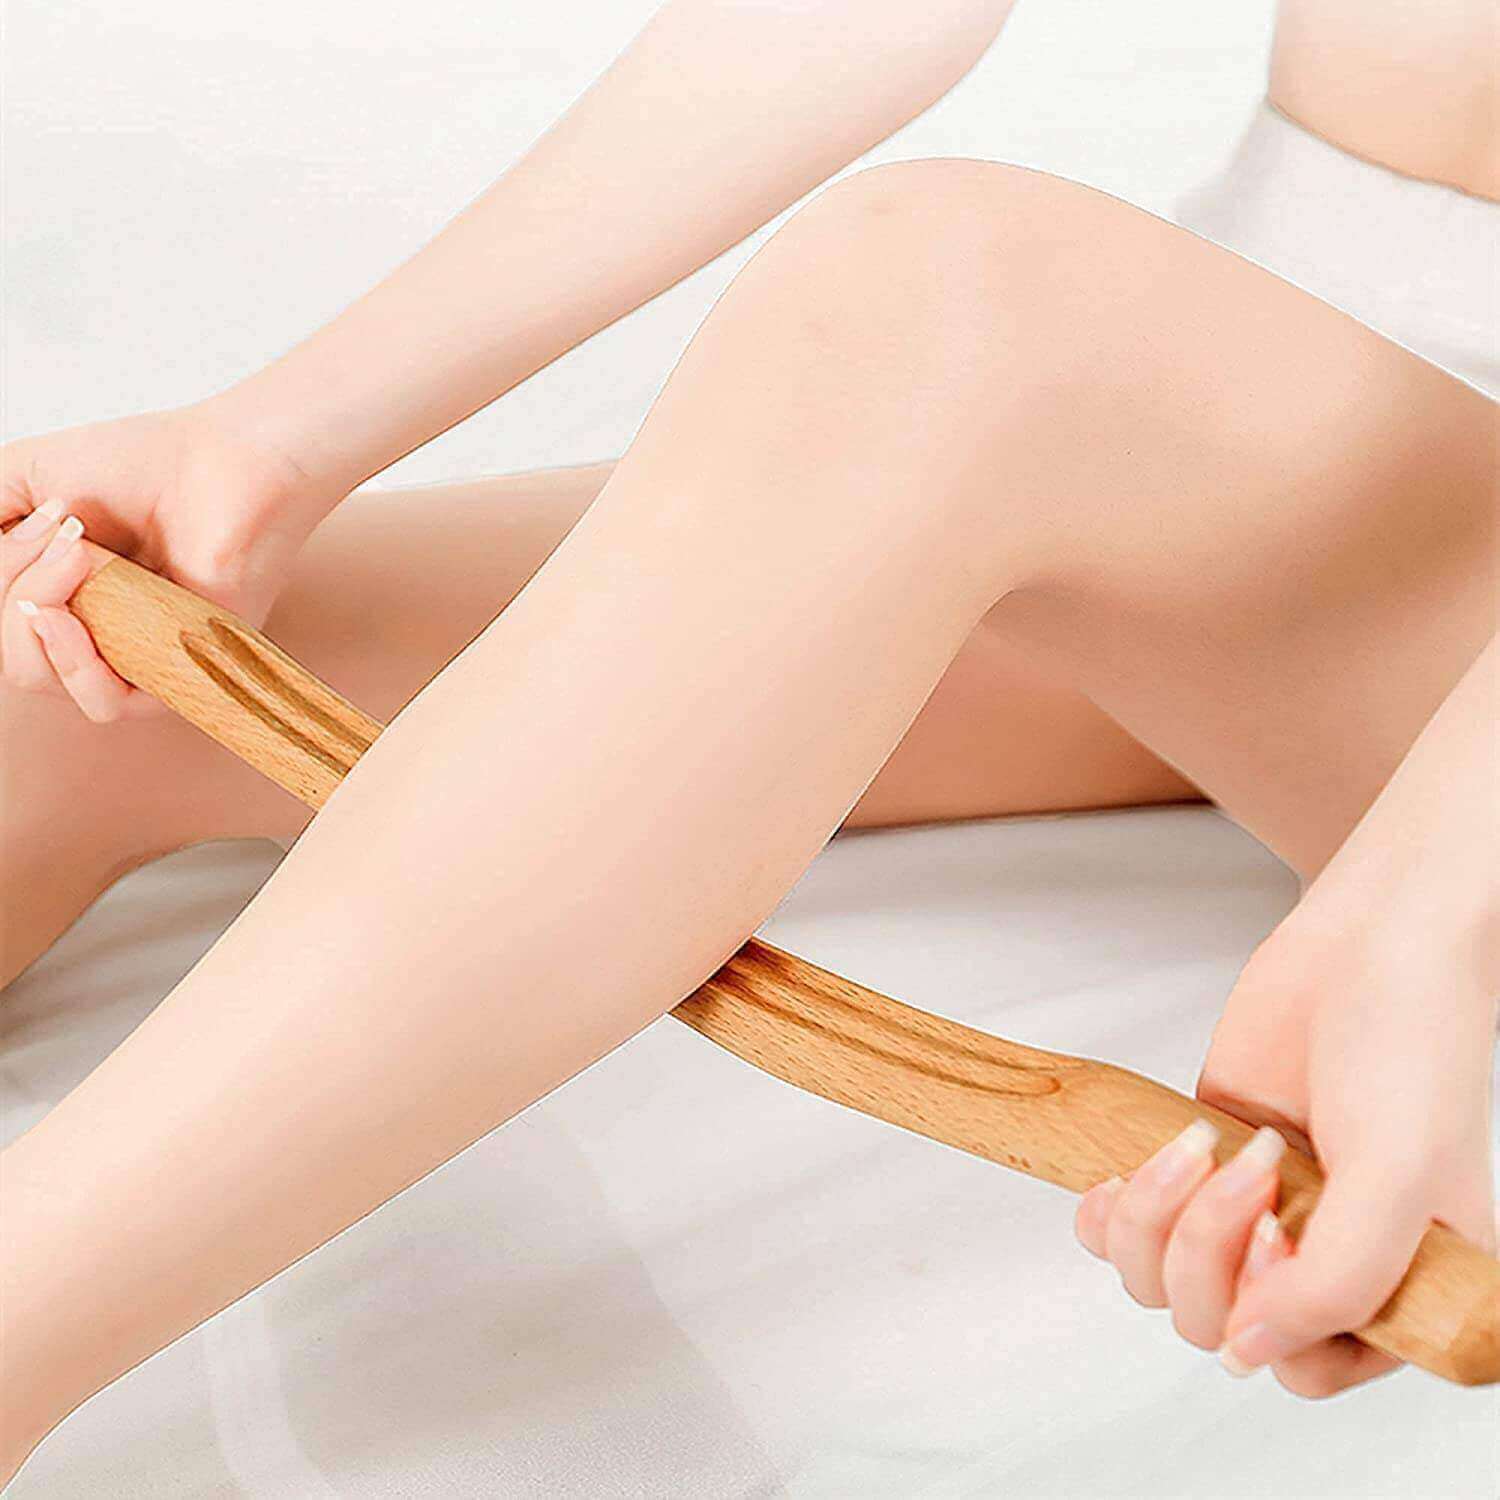 Wooden Gua Sha Massager for Therapy, item on the calf